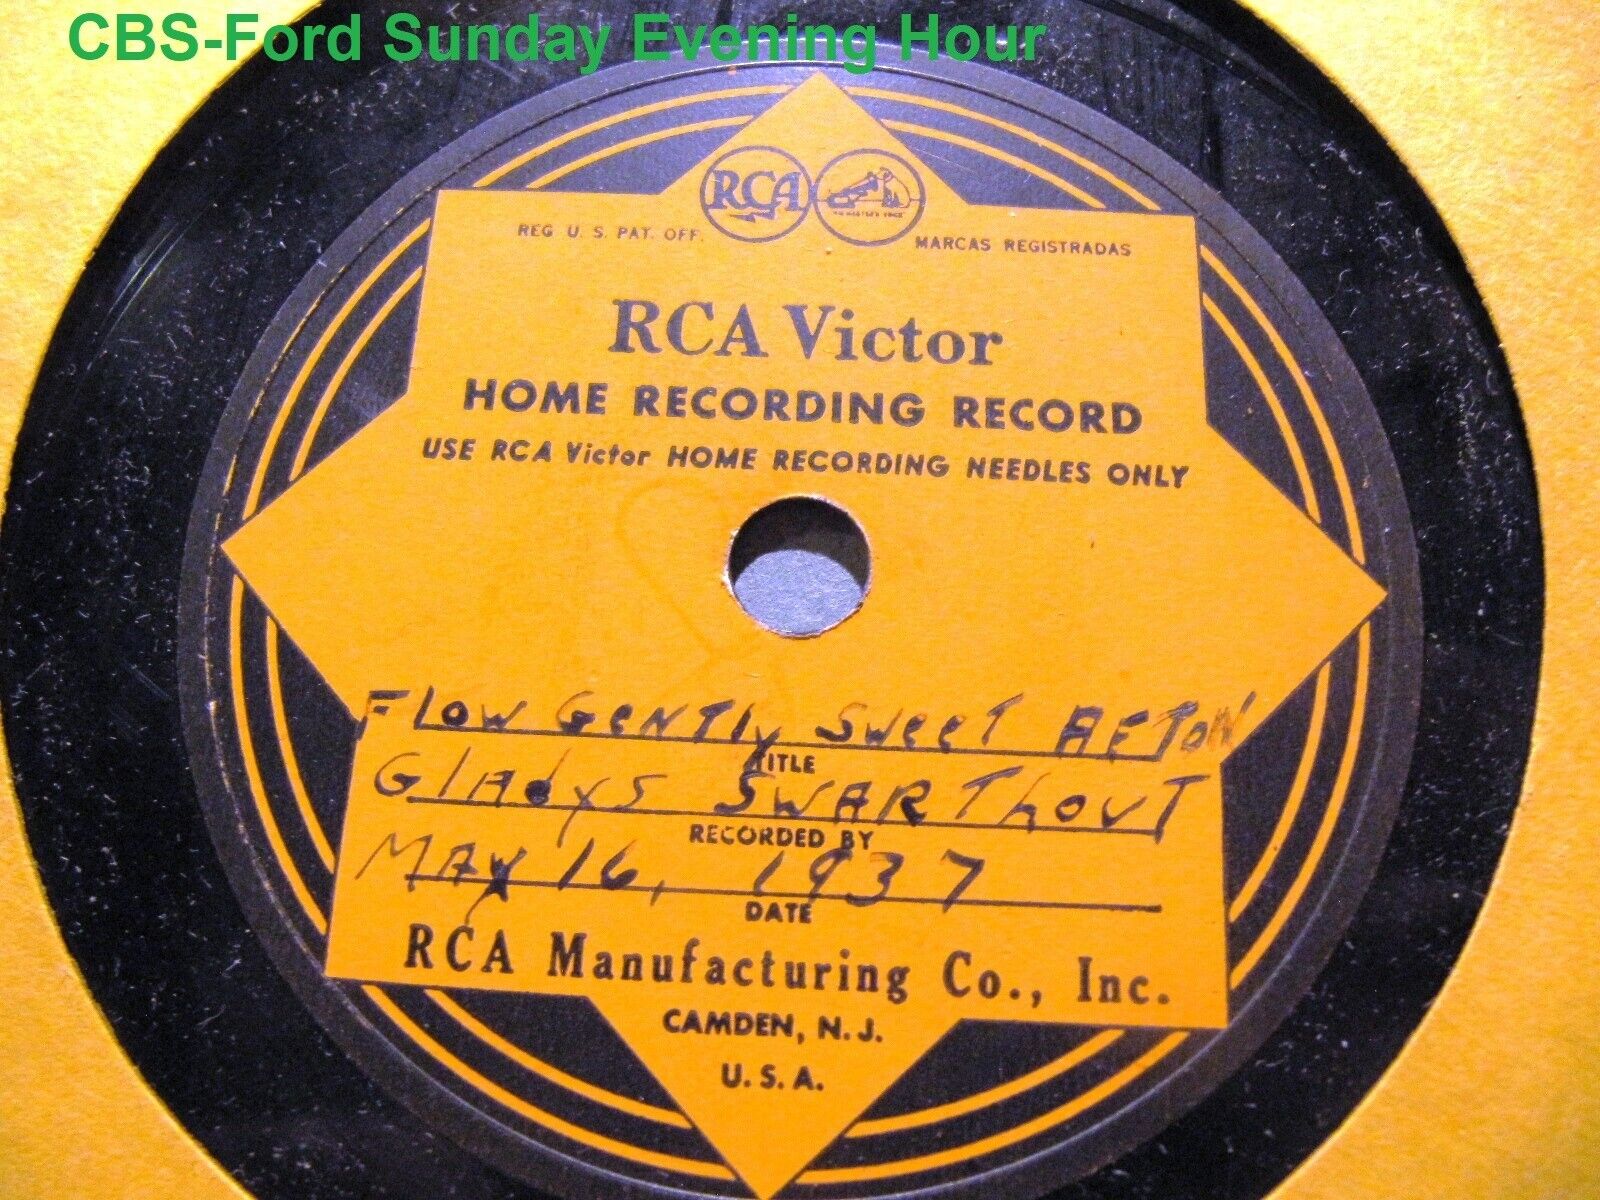 RCA Pre-grooved Home Recording Disc 1937 Radio Show Gladys Swarthout/ Lily Pons 